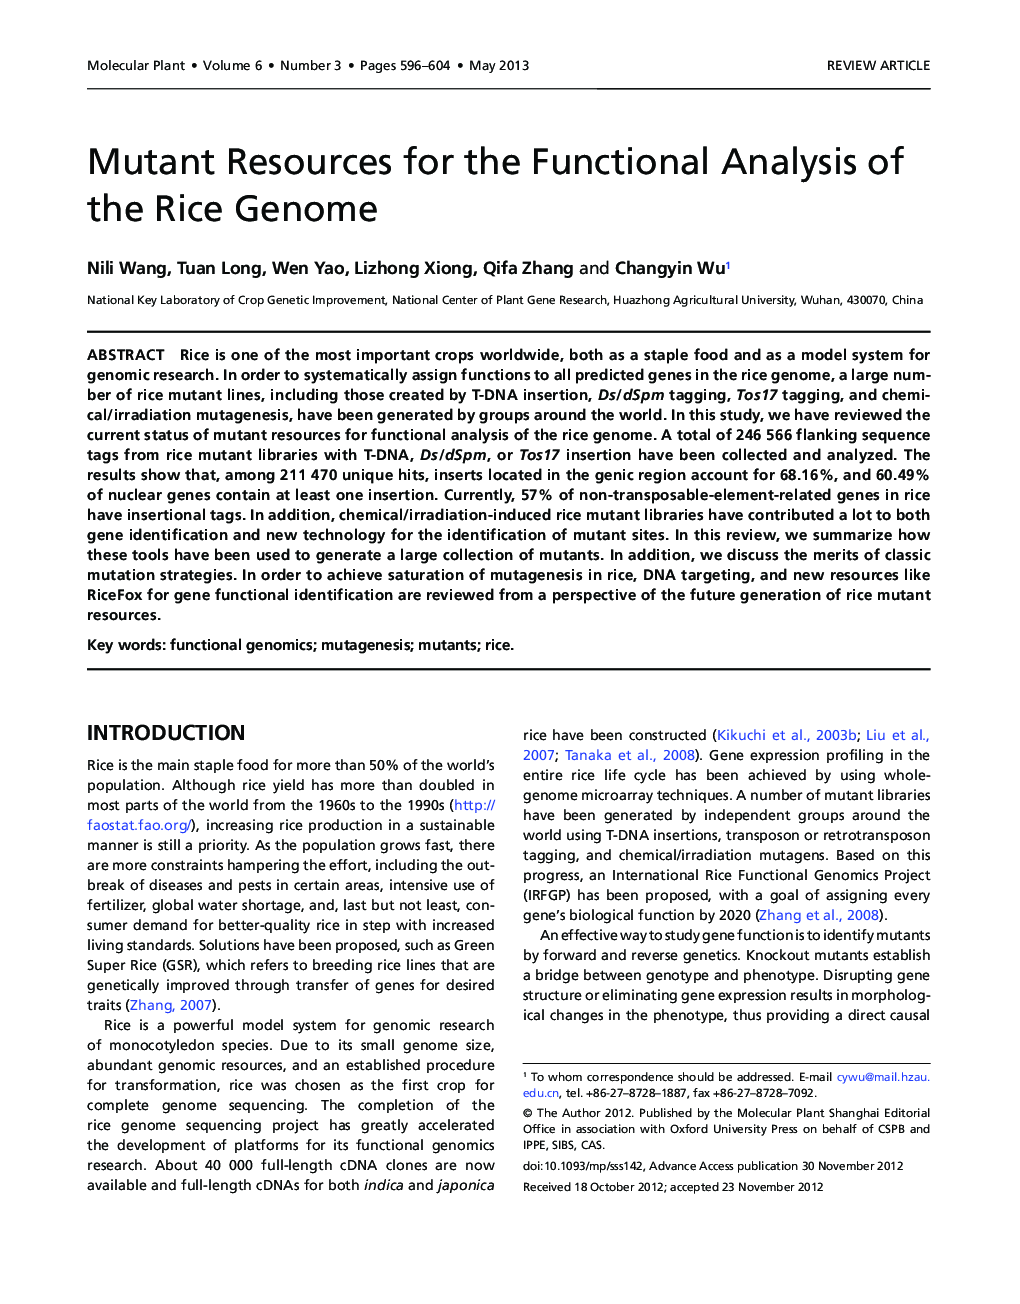 Mutant Resources for the Functional Analysis of the Rice Genome 